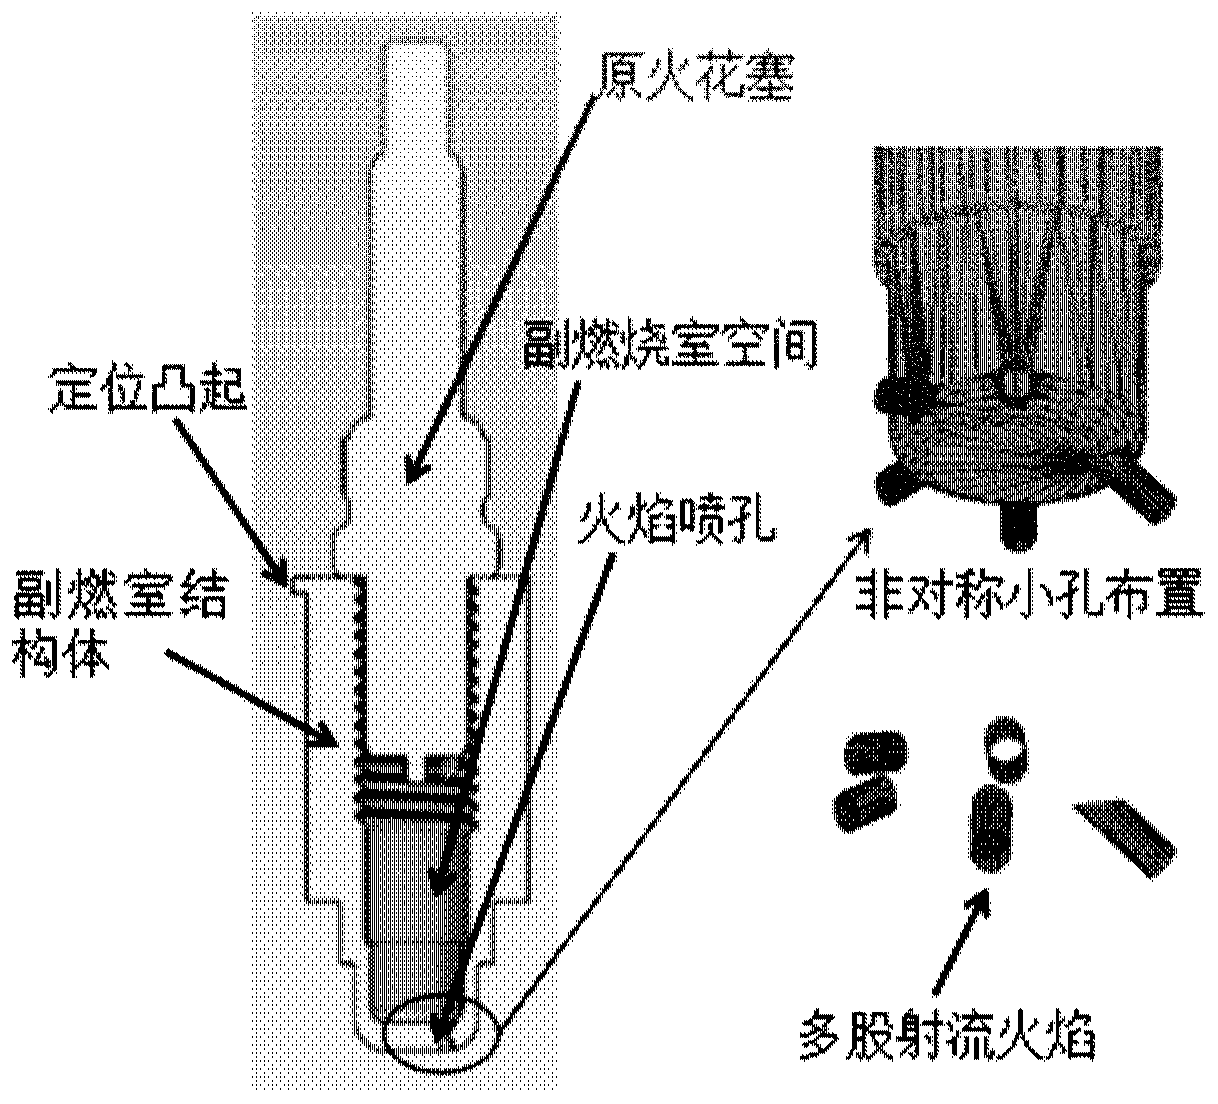 Engine rapid combustion device suitable for low-evaporation characteristic fuel